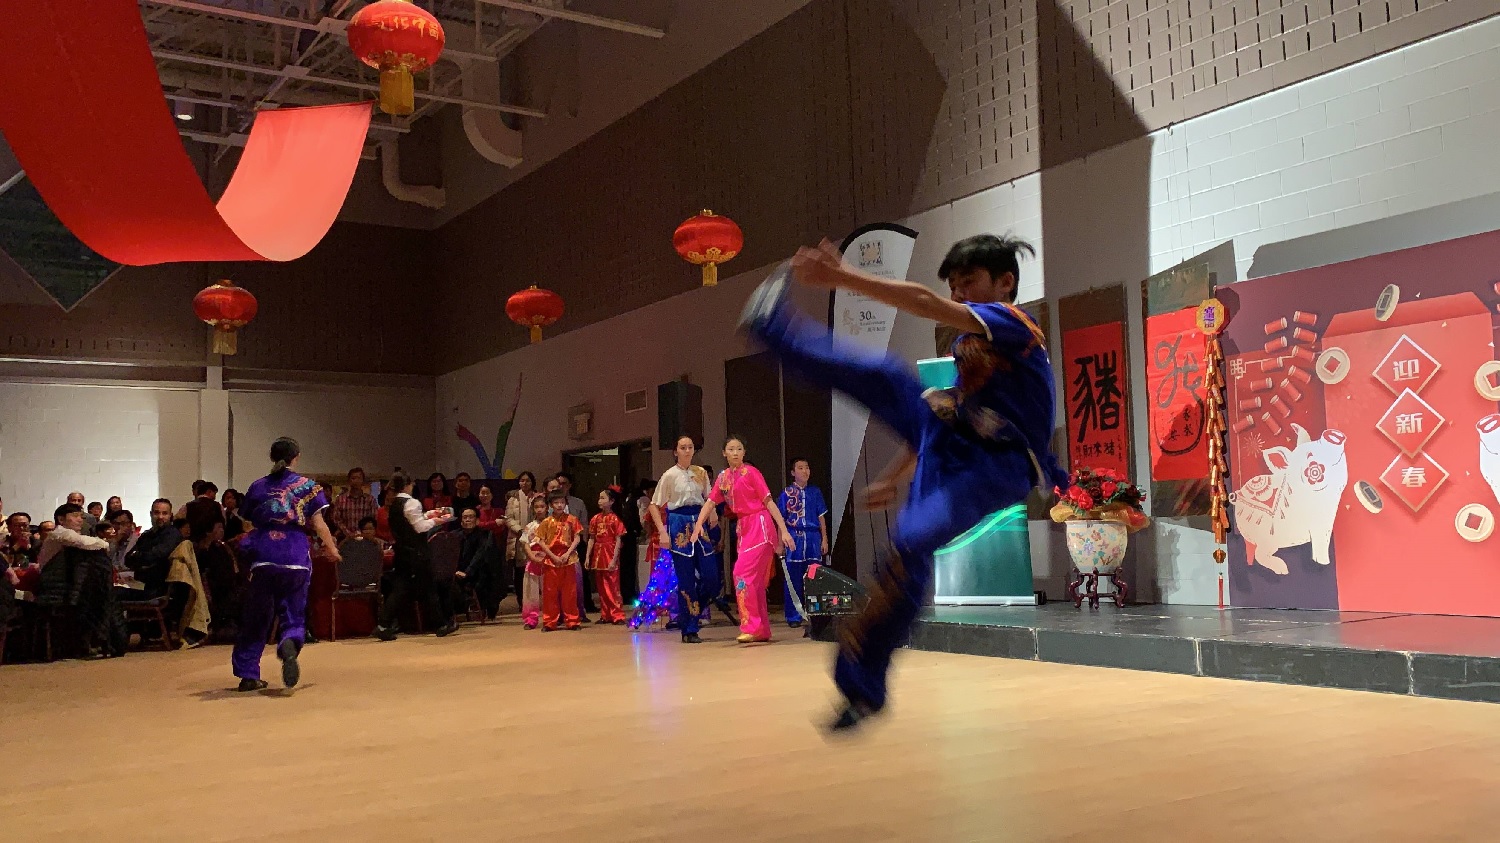 wayland-li-wushu-year-of-the-pig-dinner-chinese-cultural-centre-2019-11.jpg